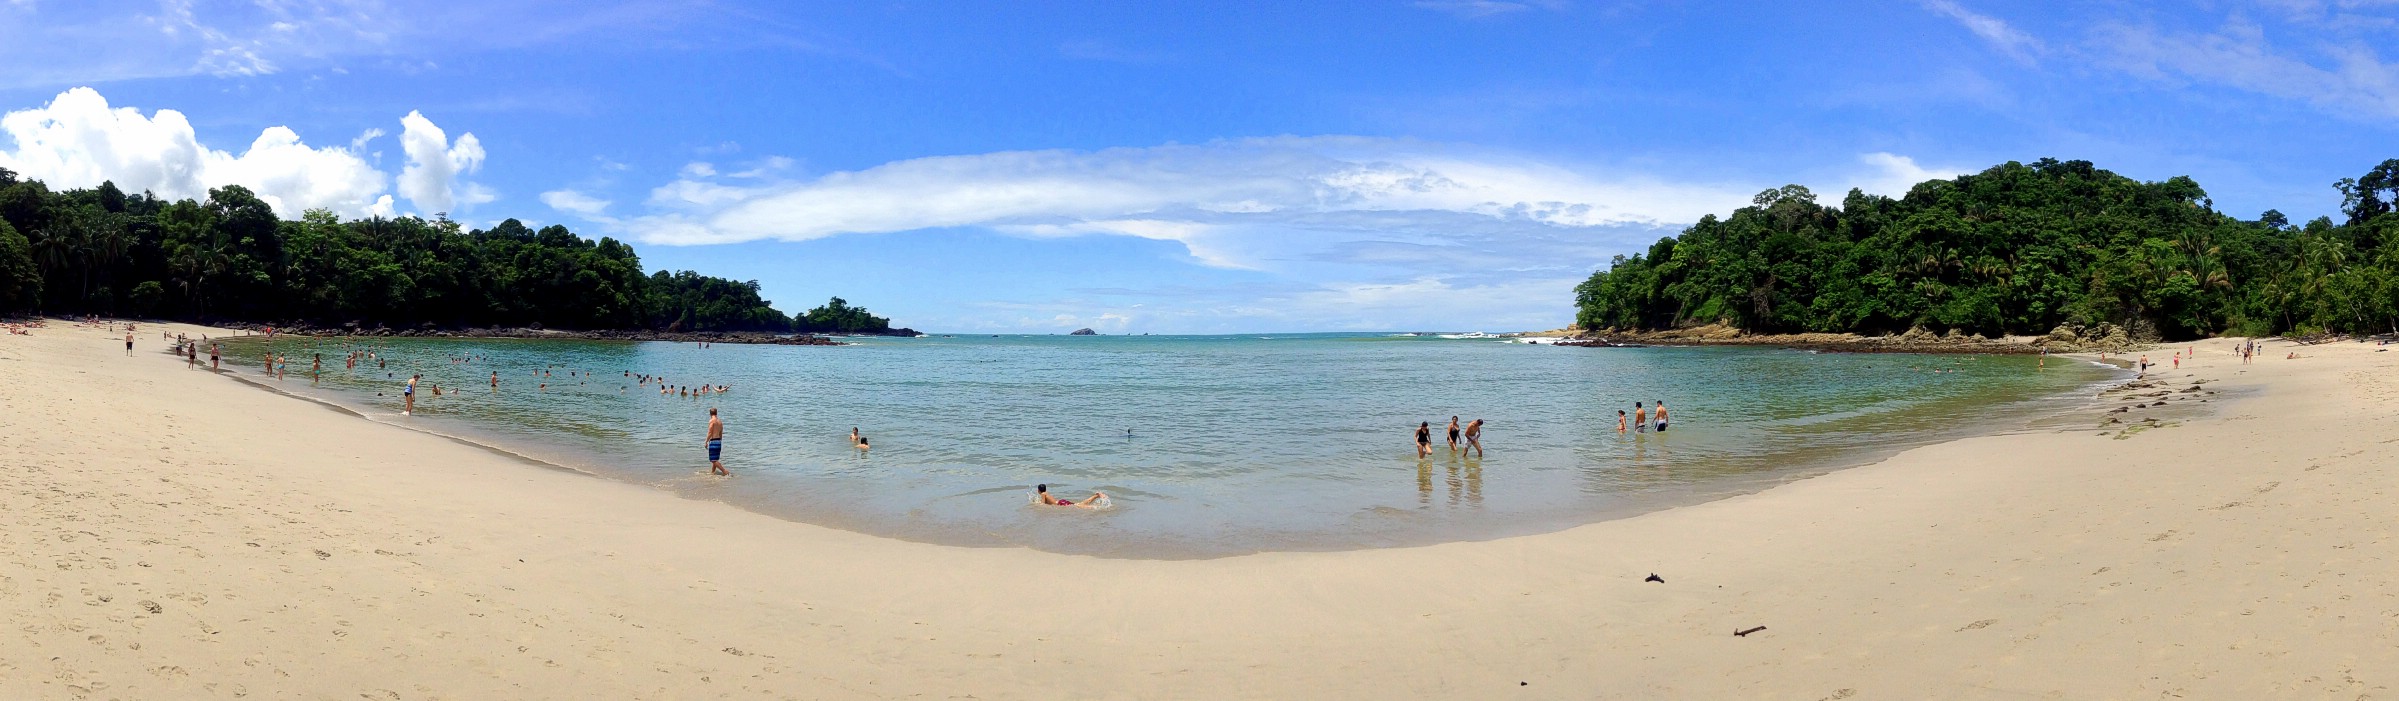 A panorama showing the grin of Playa Manuel Antonio of Parque Nacional Manuel Antonio, Costa Rica. June 26th 2013 (iPod) ***Click on image to view full screen. ***